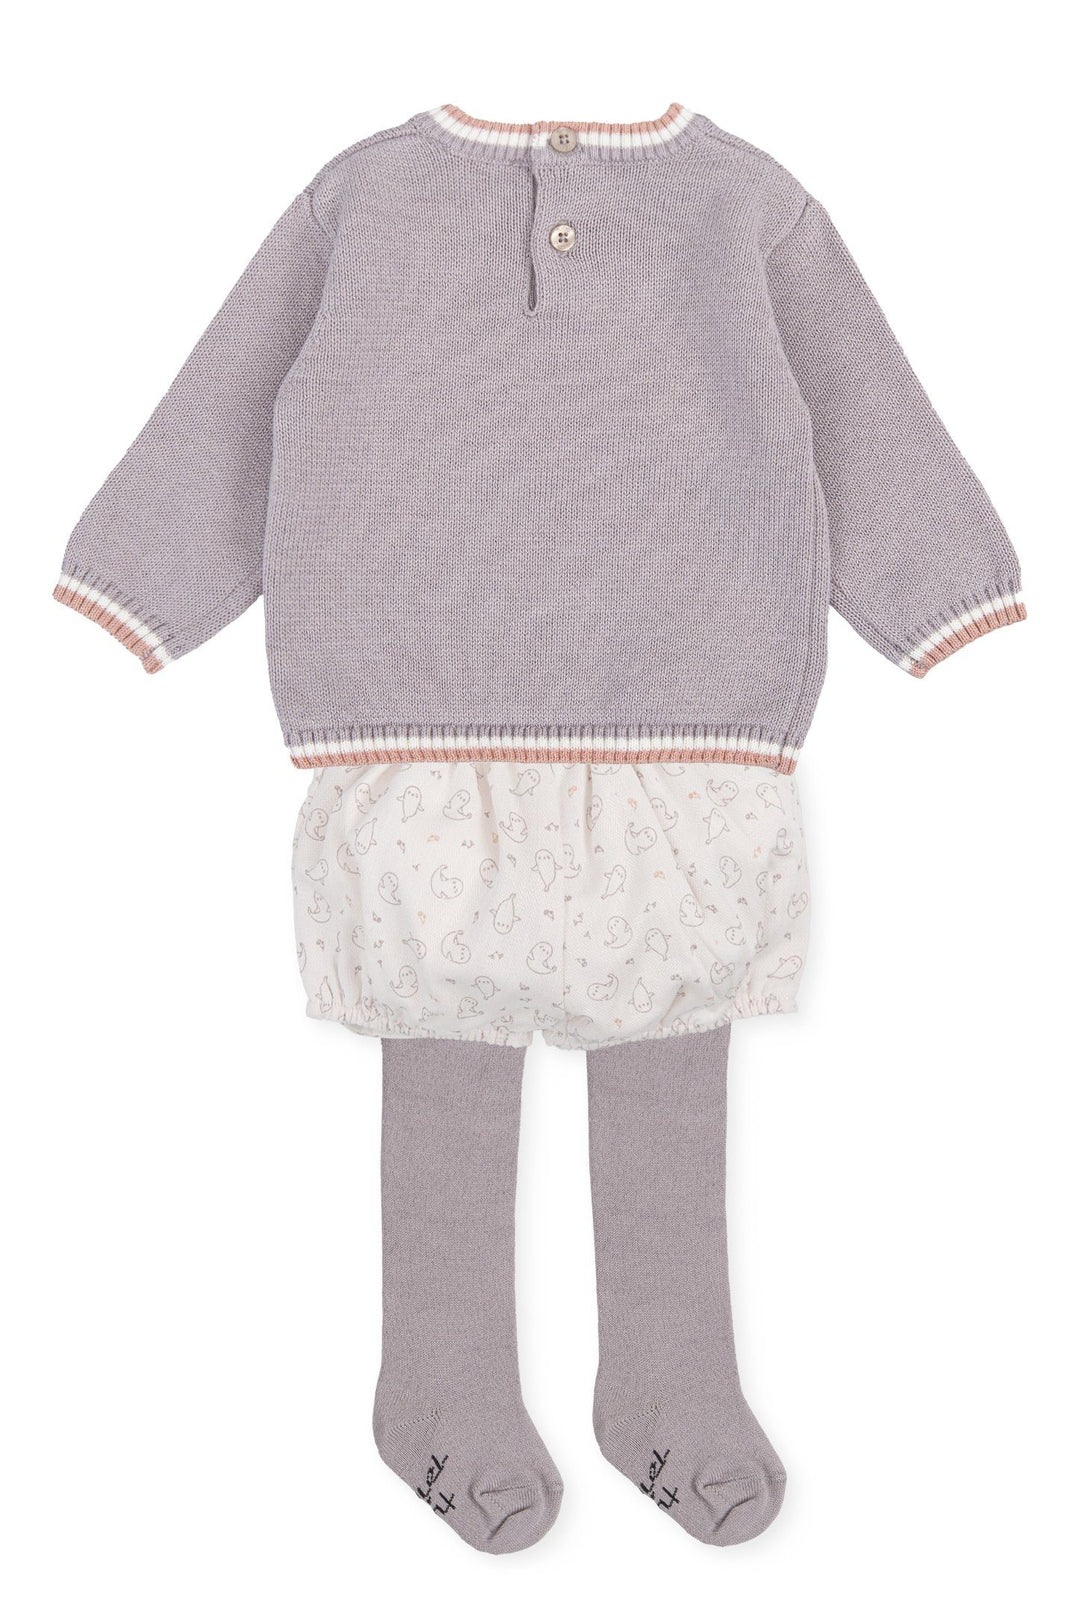 Tutto Piccolo "Devin" Grey Knit Seal Top, Jam Pants & Tights | Millie and John